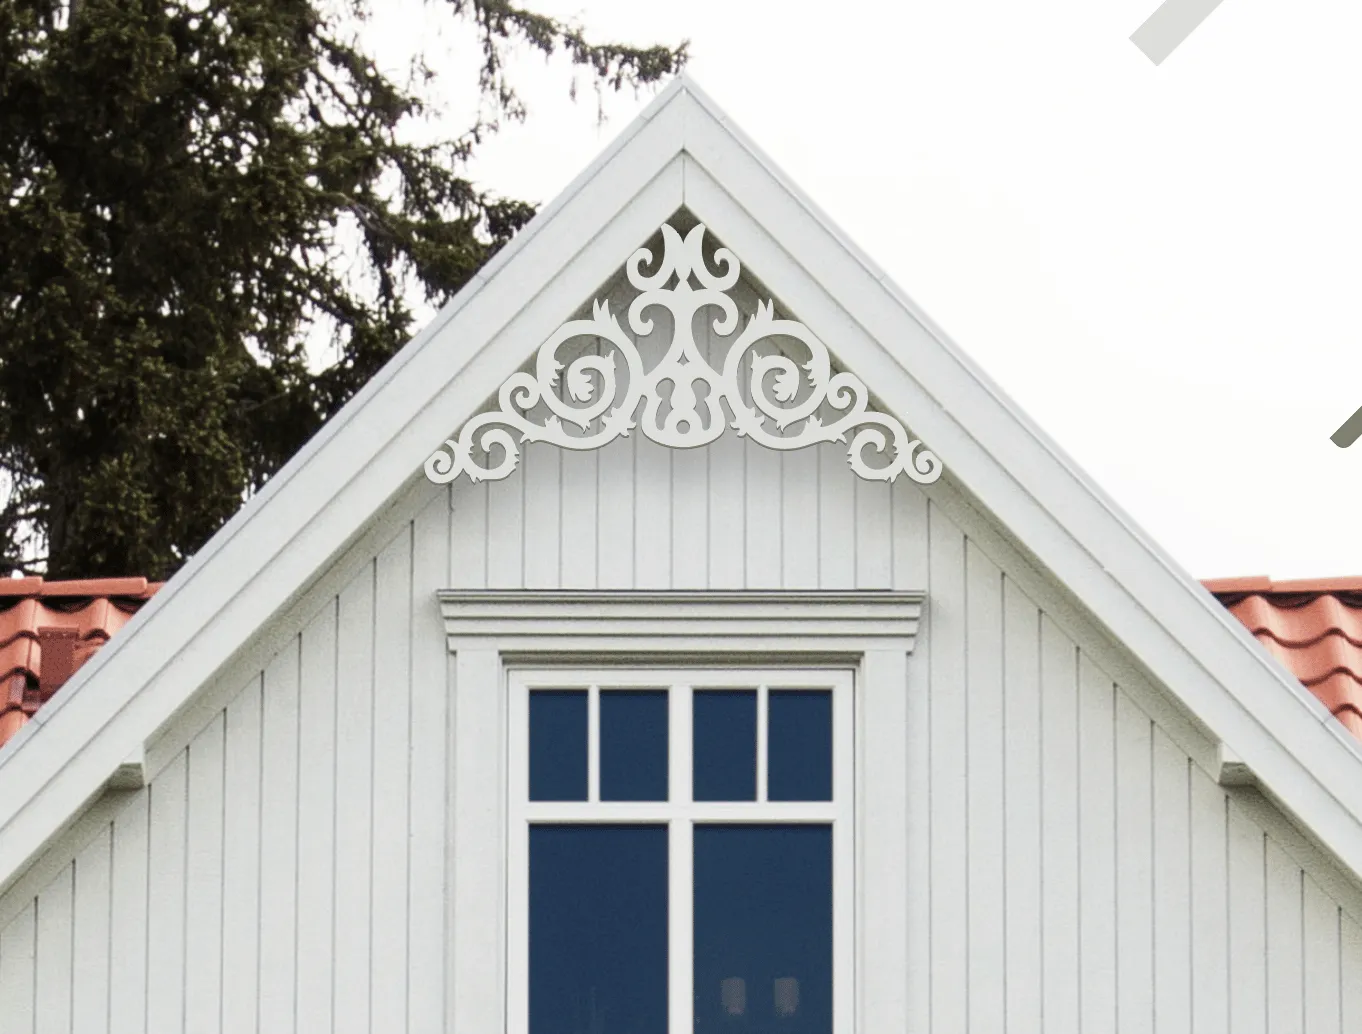 Gable pediment 012 - A white house with decorative wooden victorian millwork as house decoration for roof and gable end. The top frame is mounted behind the eaves.